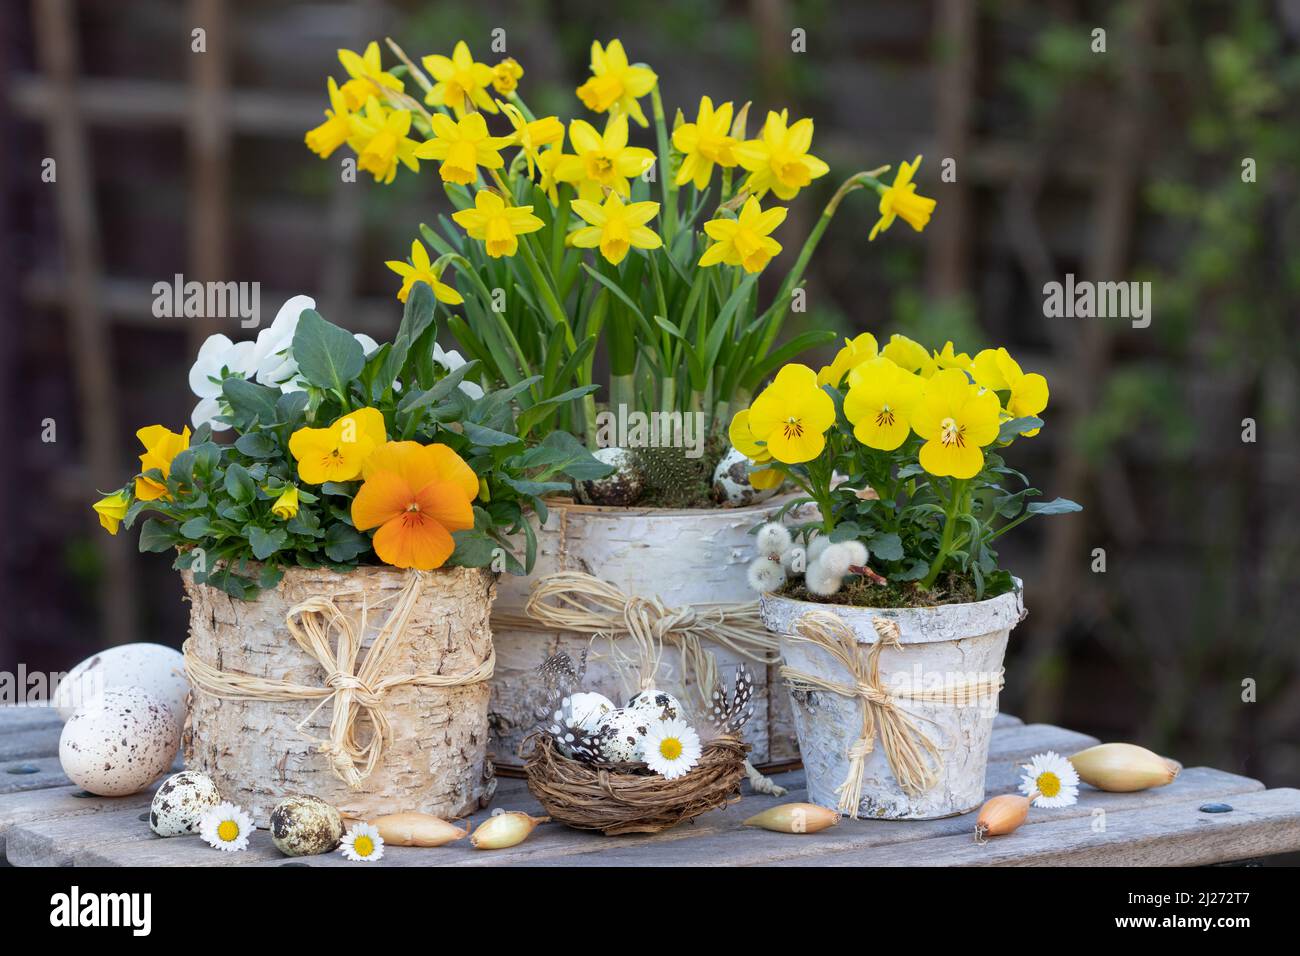 yellow viola flowers and narcissus in birch bark pots as rustic spring decoration Stock Photo